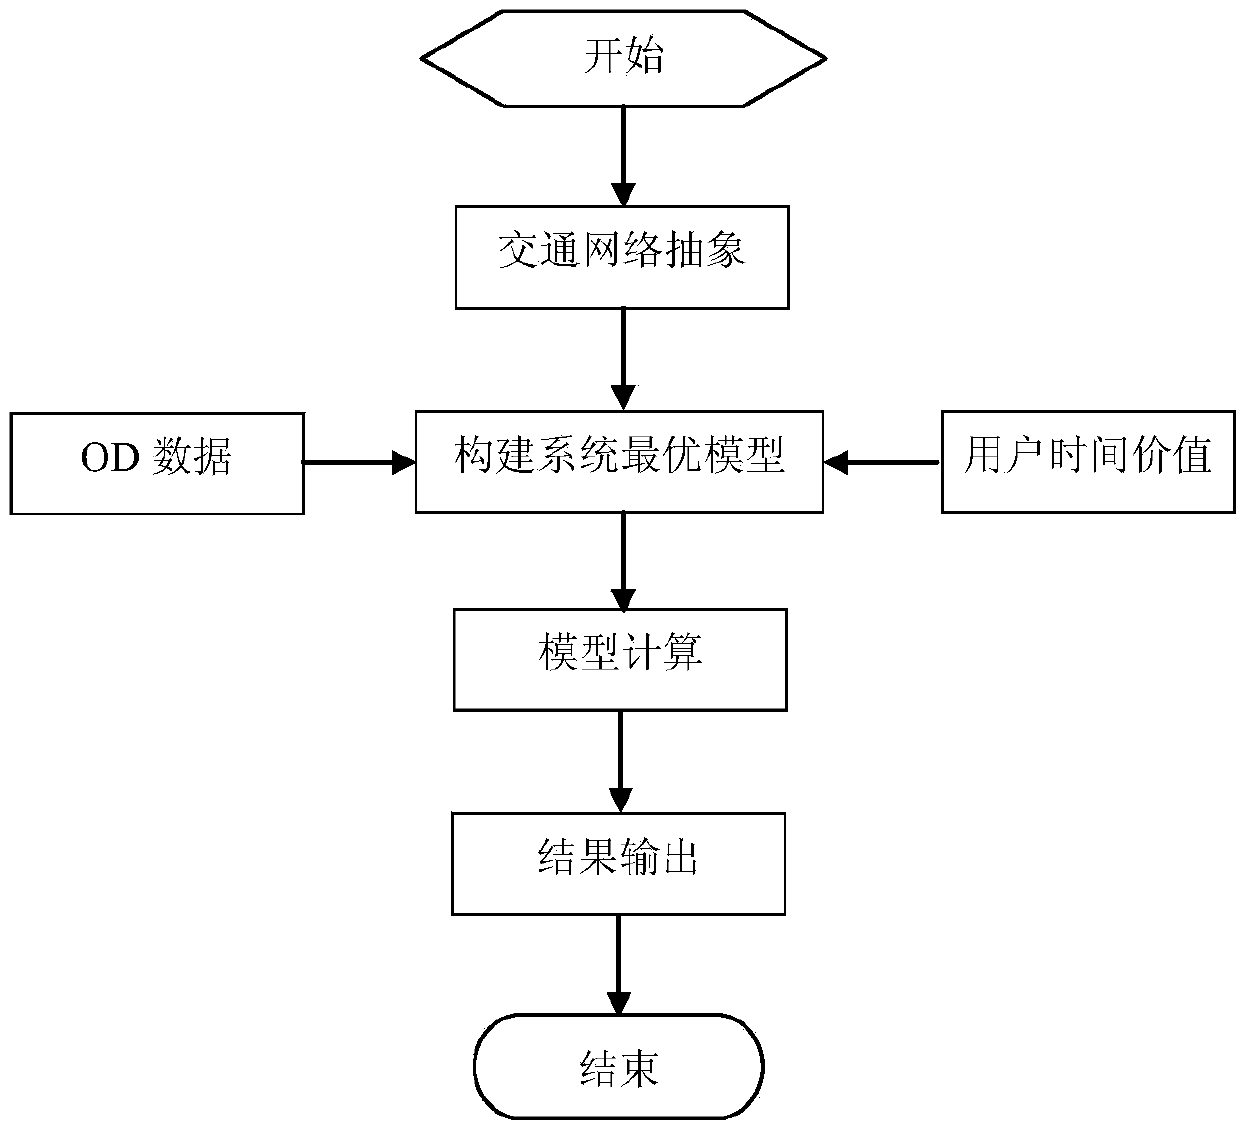 System optimal traffic distribution model and distribution method oriented to heterogeneous users